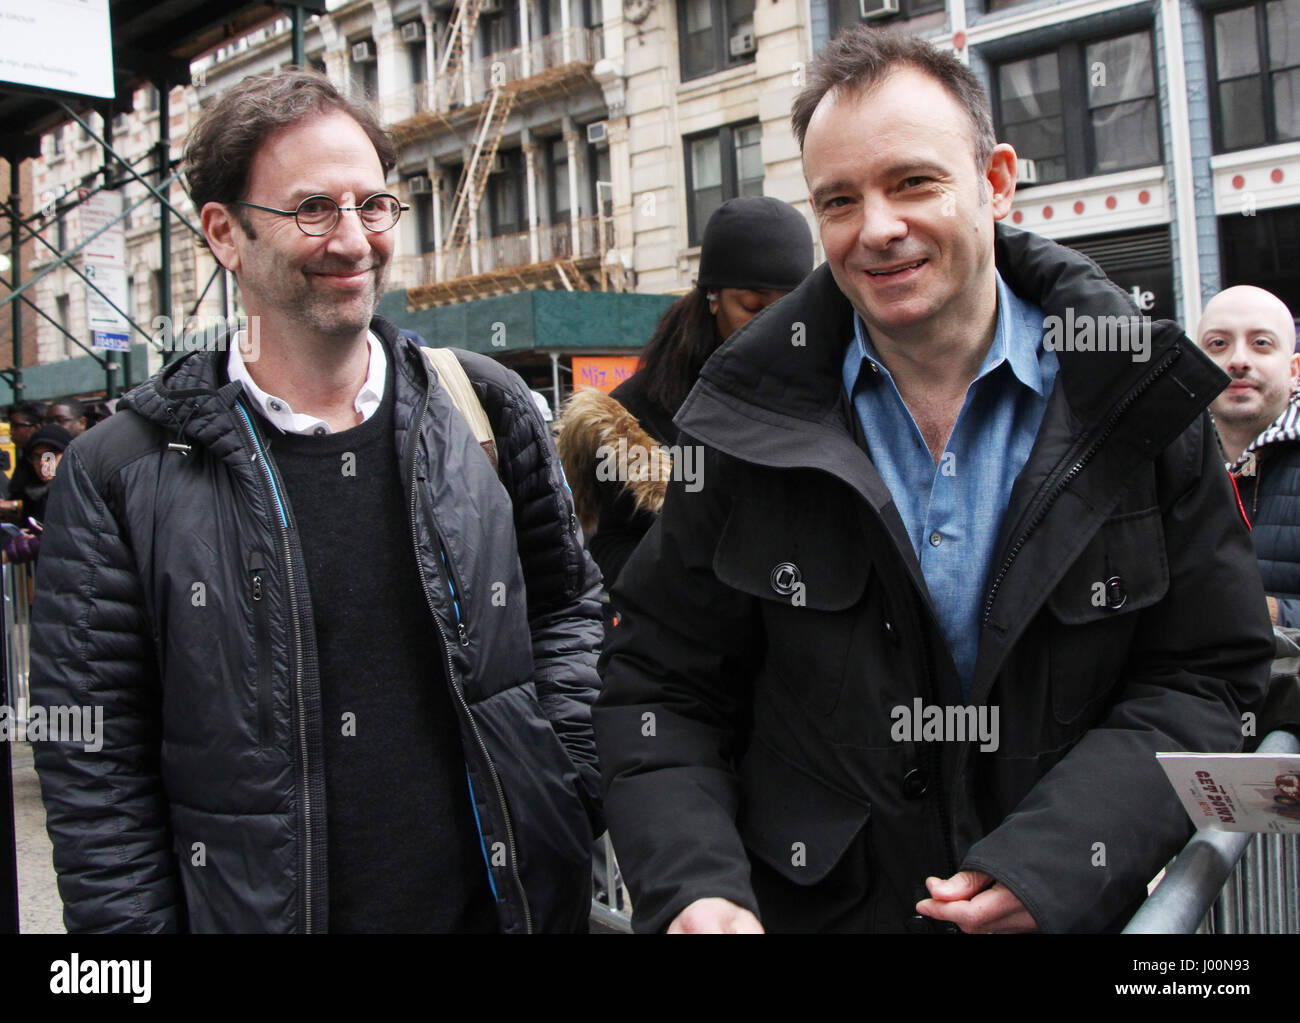 New York, NY, USA. 07th Apr, 2017. Danny Rubin and Matthew Warchus seen out for an appearance at AOL Build in New York City on April 7, 2017. Credit: Rw/Media Punch/Alamy Live News Stock Photo